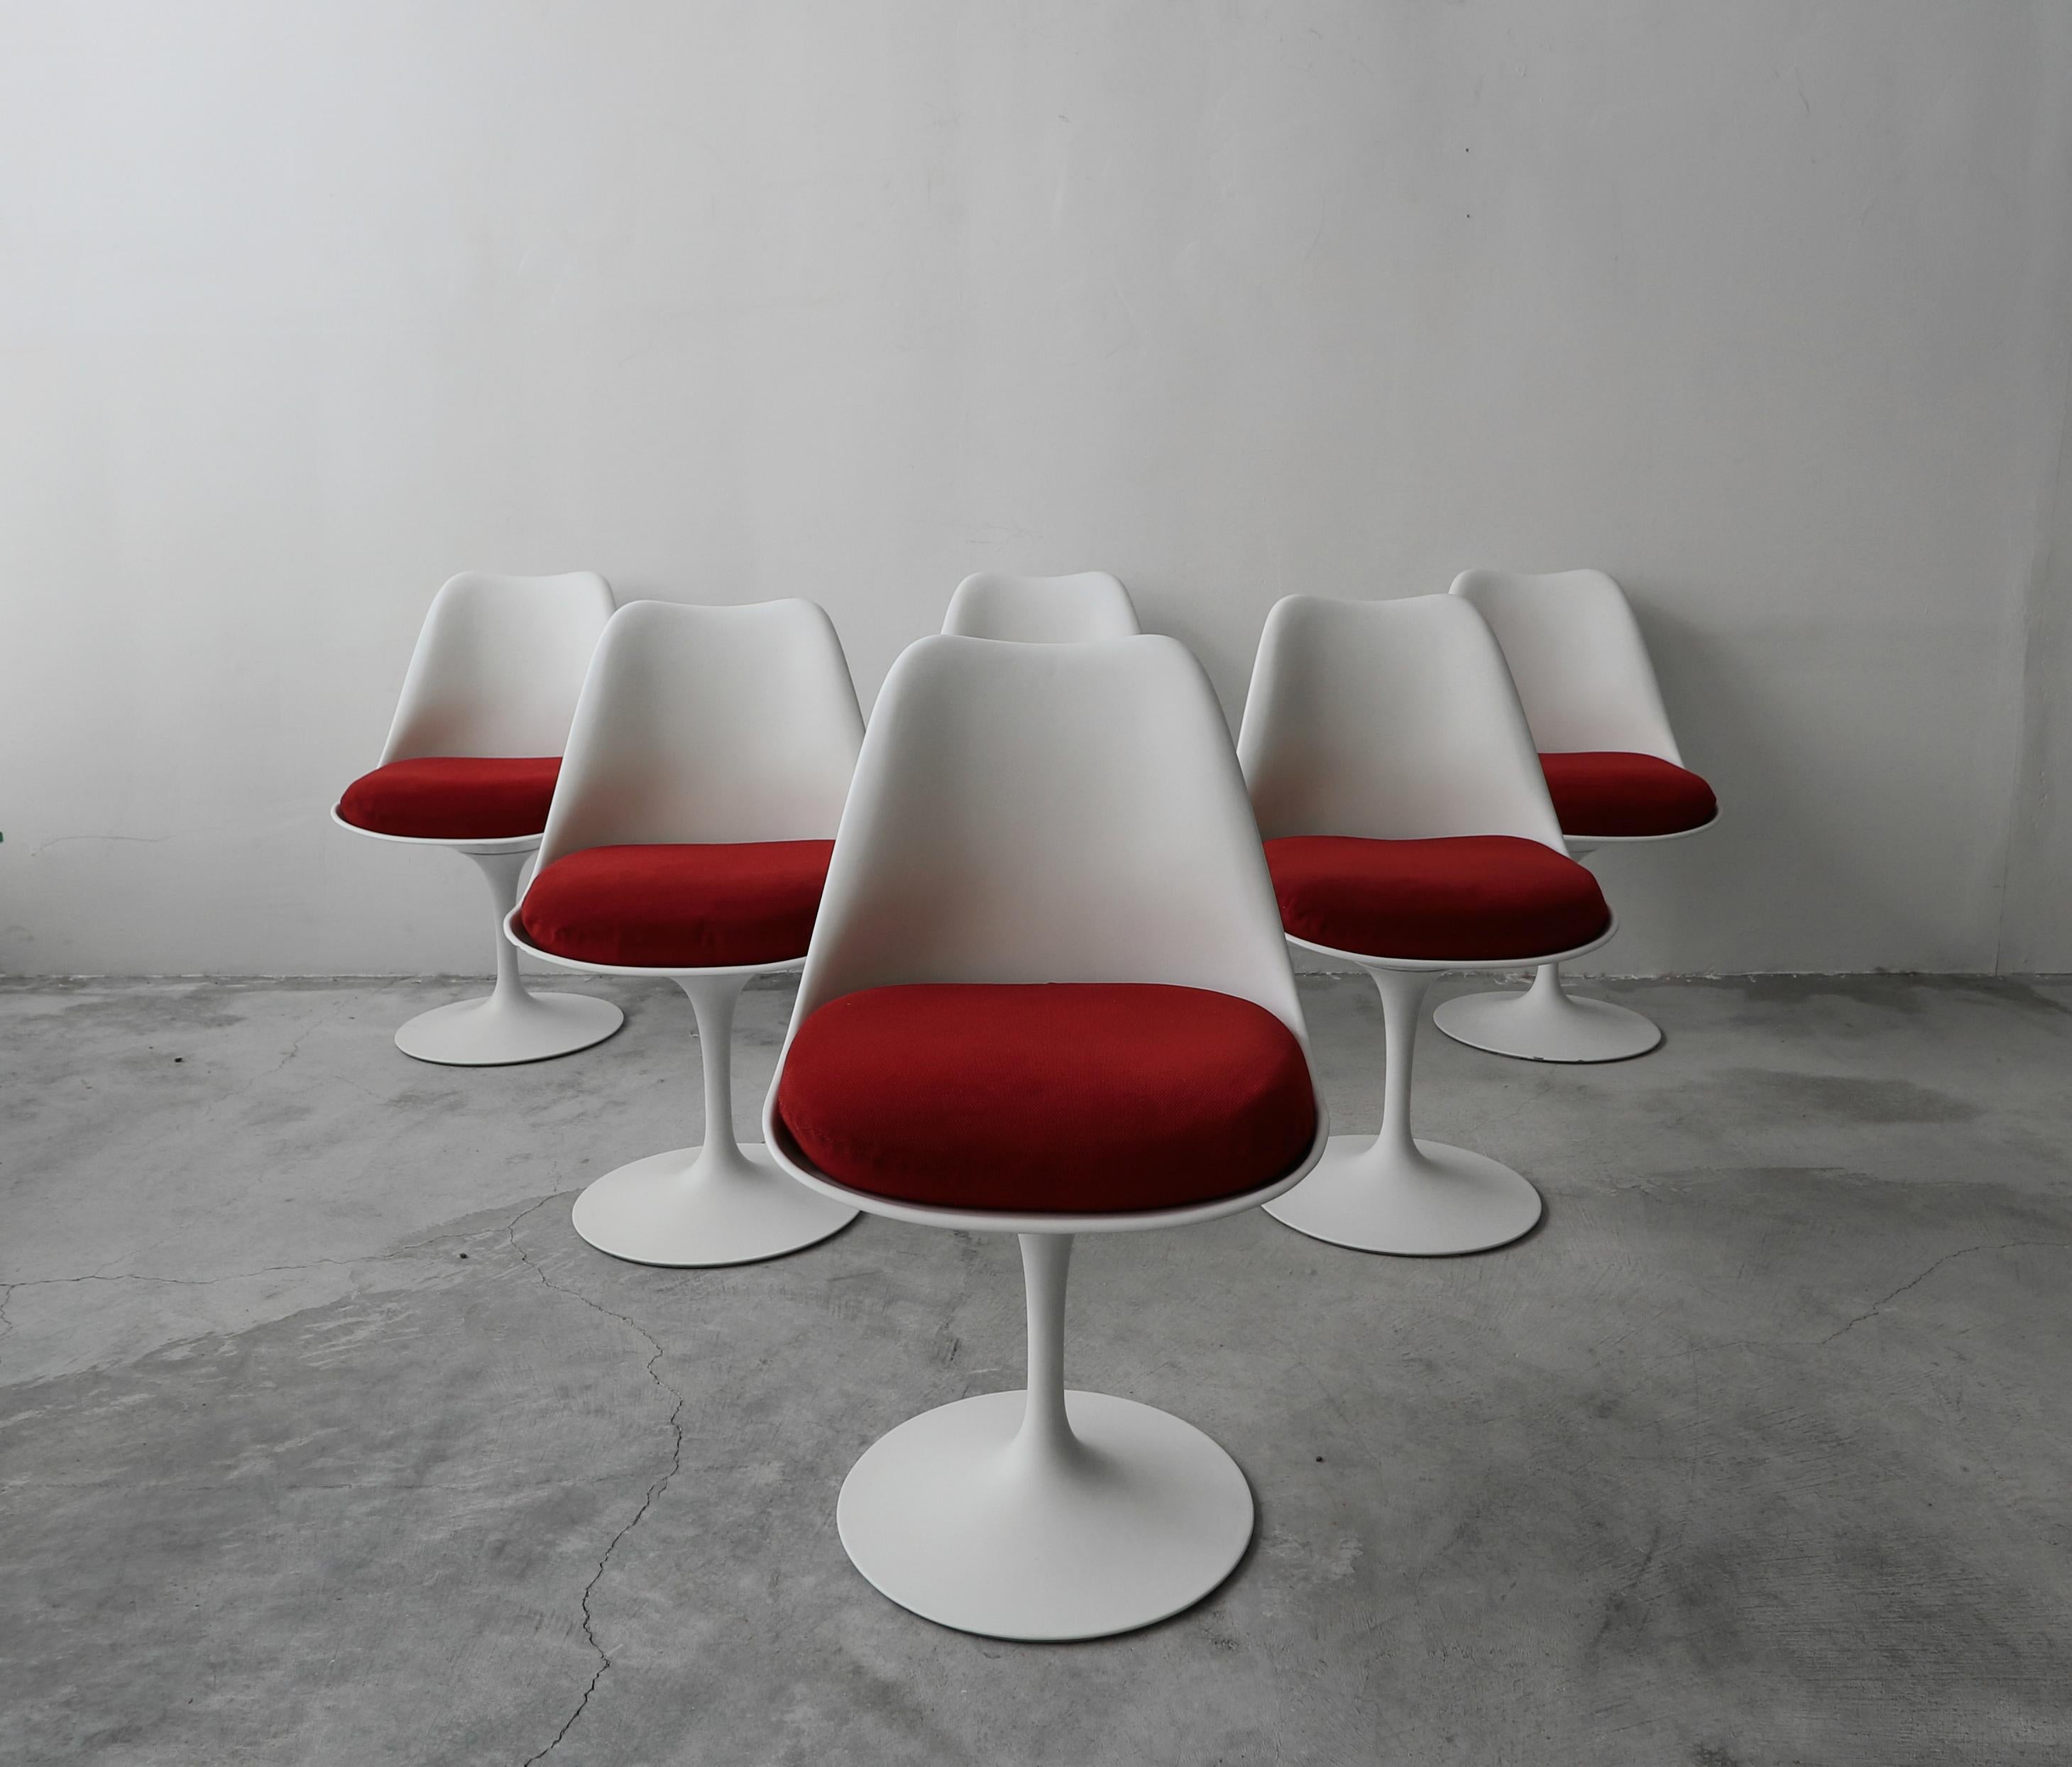 Set of 6, authentic midcentury Tulip chairs designed by Eero Saarinen for Knoll. The label with the 320 Park address dates it to 1961-1969.

Chairs are in overall great condition for their age. We have left them as found, i highlighted the most